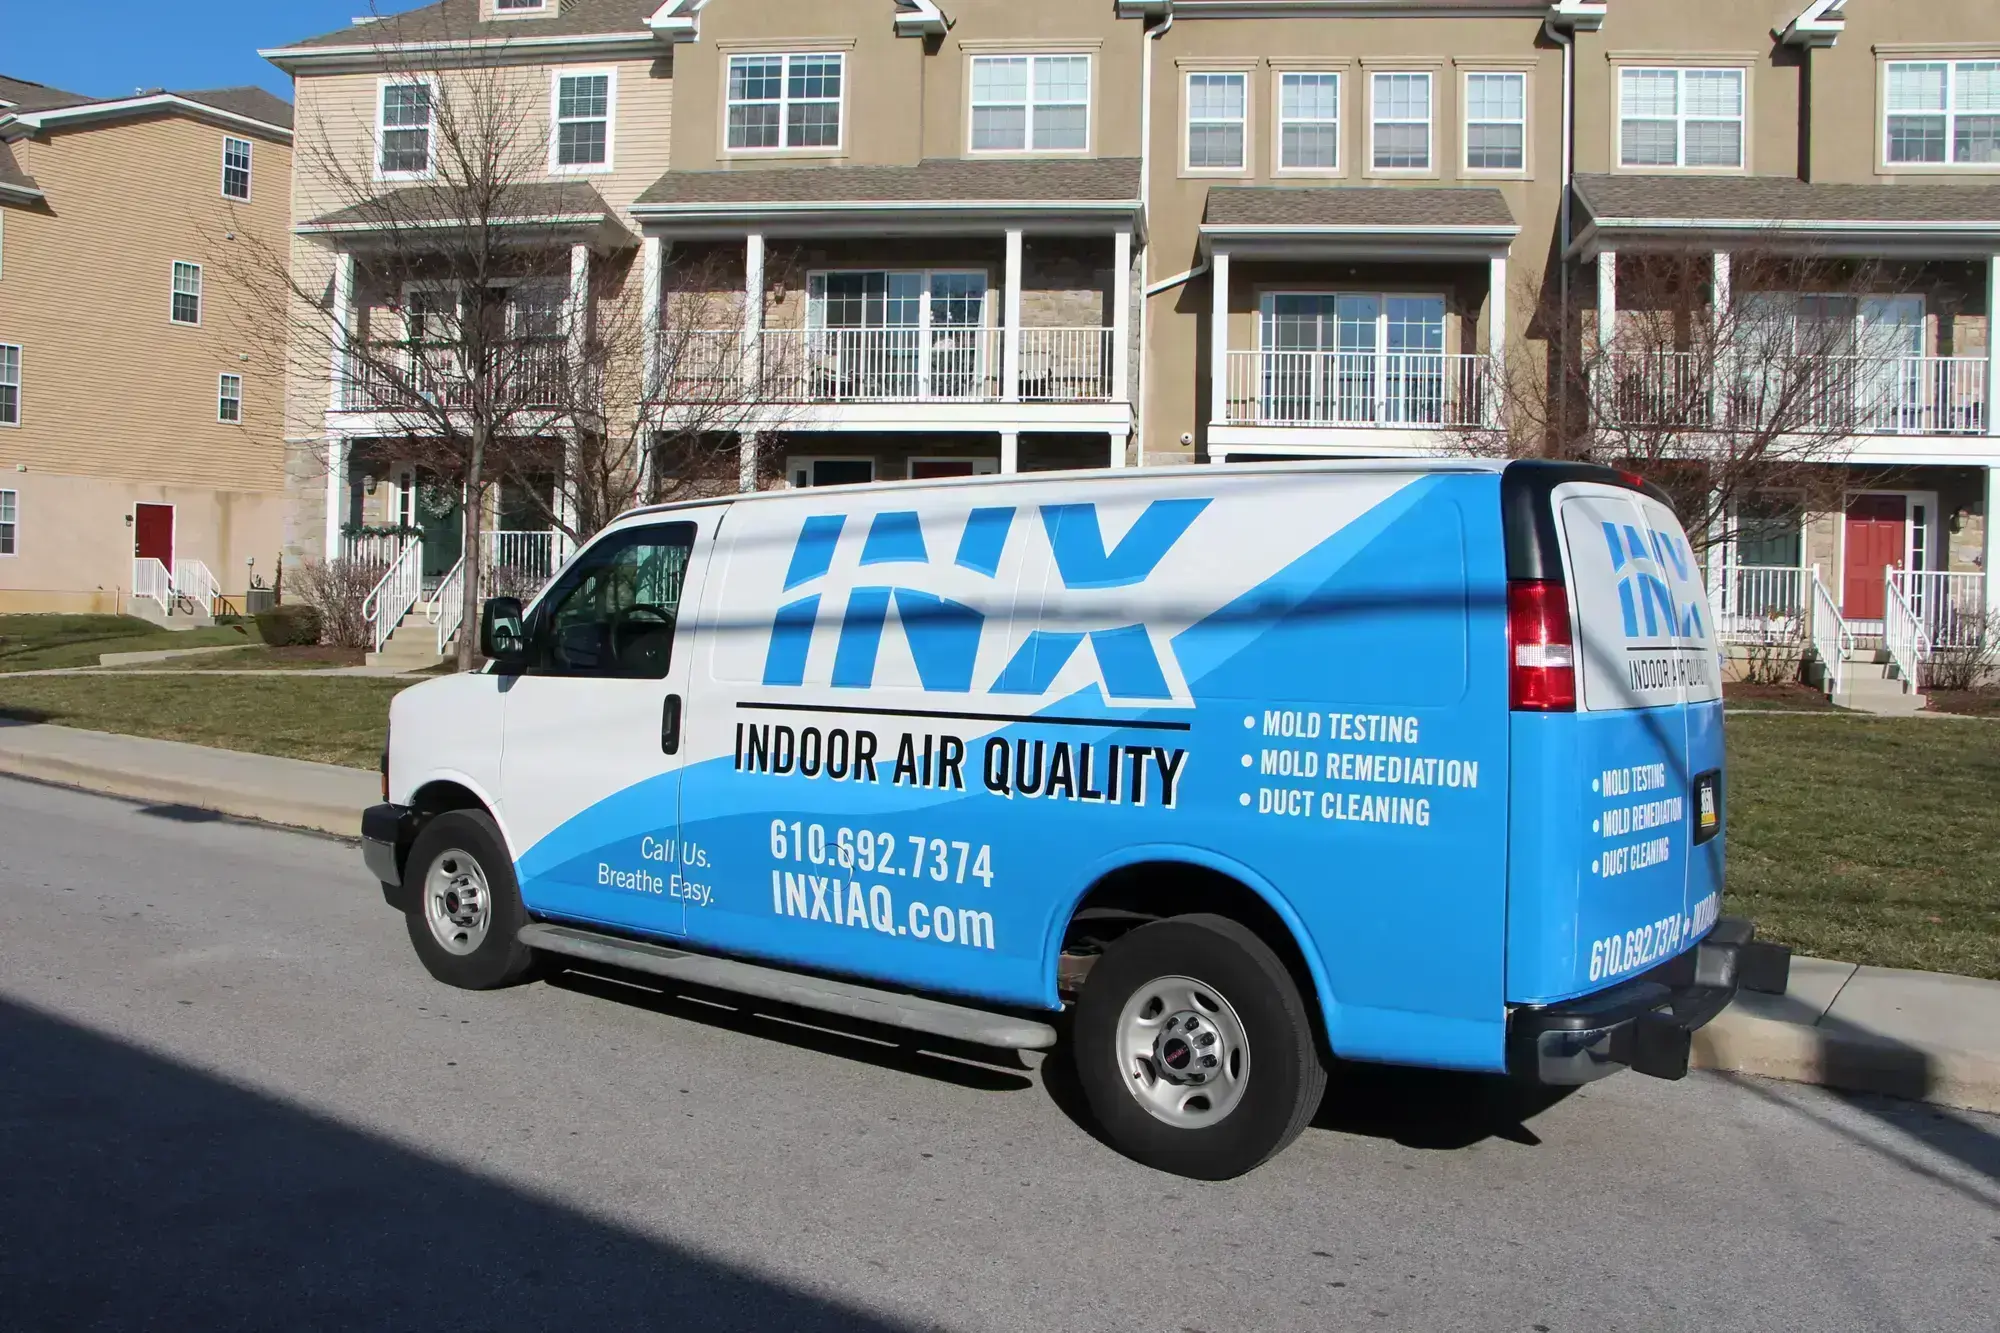 INX Indoor Air Quality van, mold removal chester county pa, mold removal in west chester, mold remediation chester county pa, basement waterproofing in commercial buildings, we have effectively removed black mold in spring city, west grove, lincoln university, eastern pa, kennett square, south pottstown, and chester county pa.